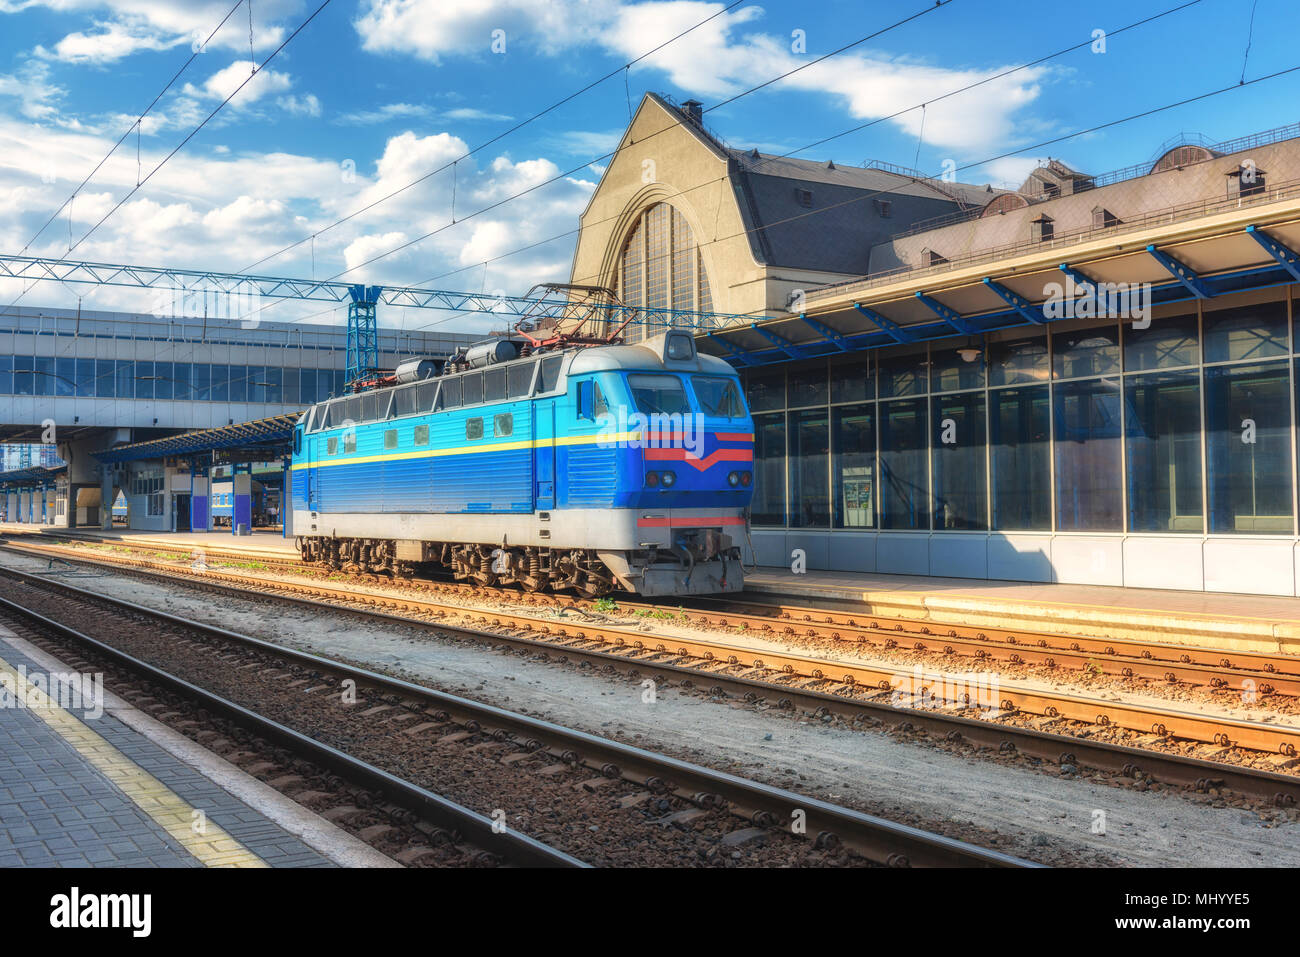 Blue freight train on the railway station at sunset in Ukraine. Industrial landscape with old locomotive, buildings, rails and blue sky with clouds. T Stock Photo